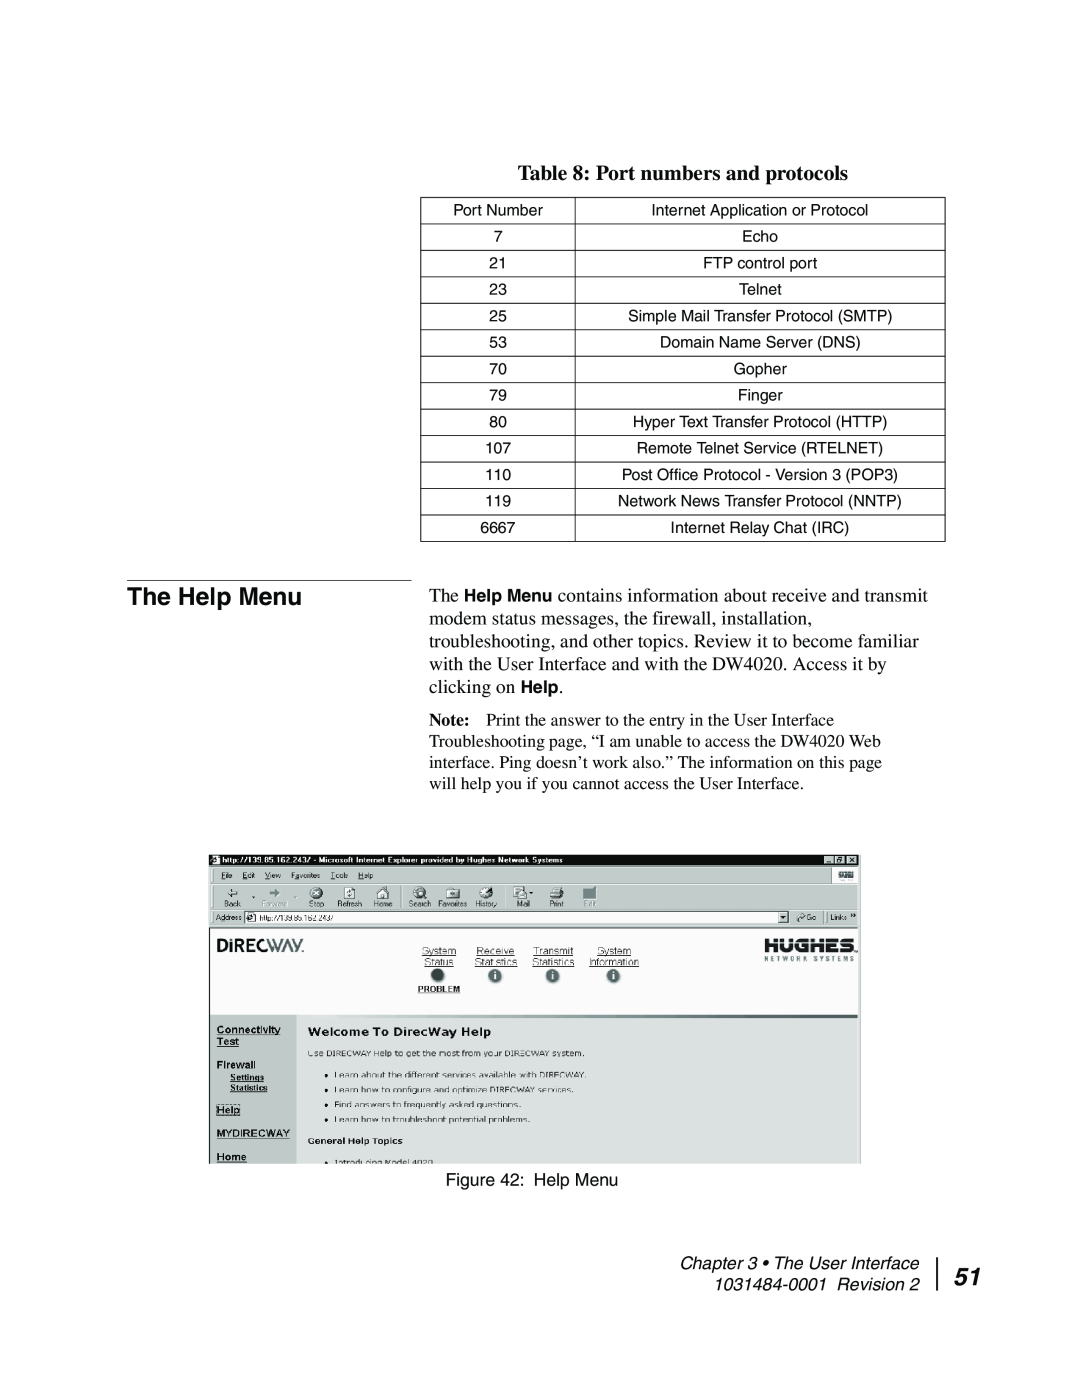 Hughes DW4020 manual The Help Menu, Port numbers and protocols, The User Interface 1031484-0001 Revision 